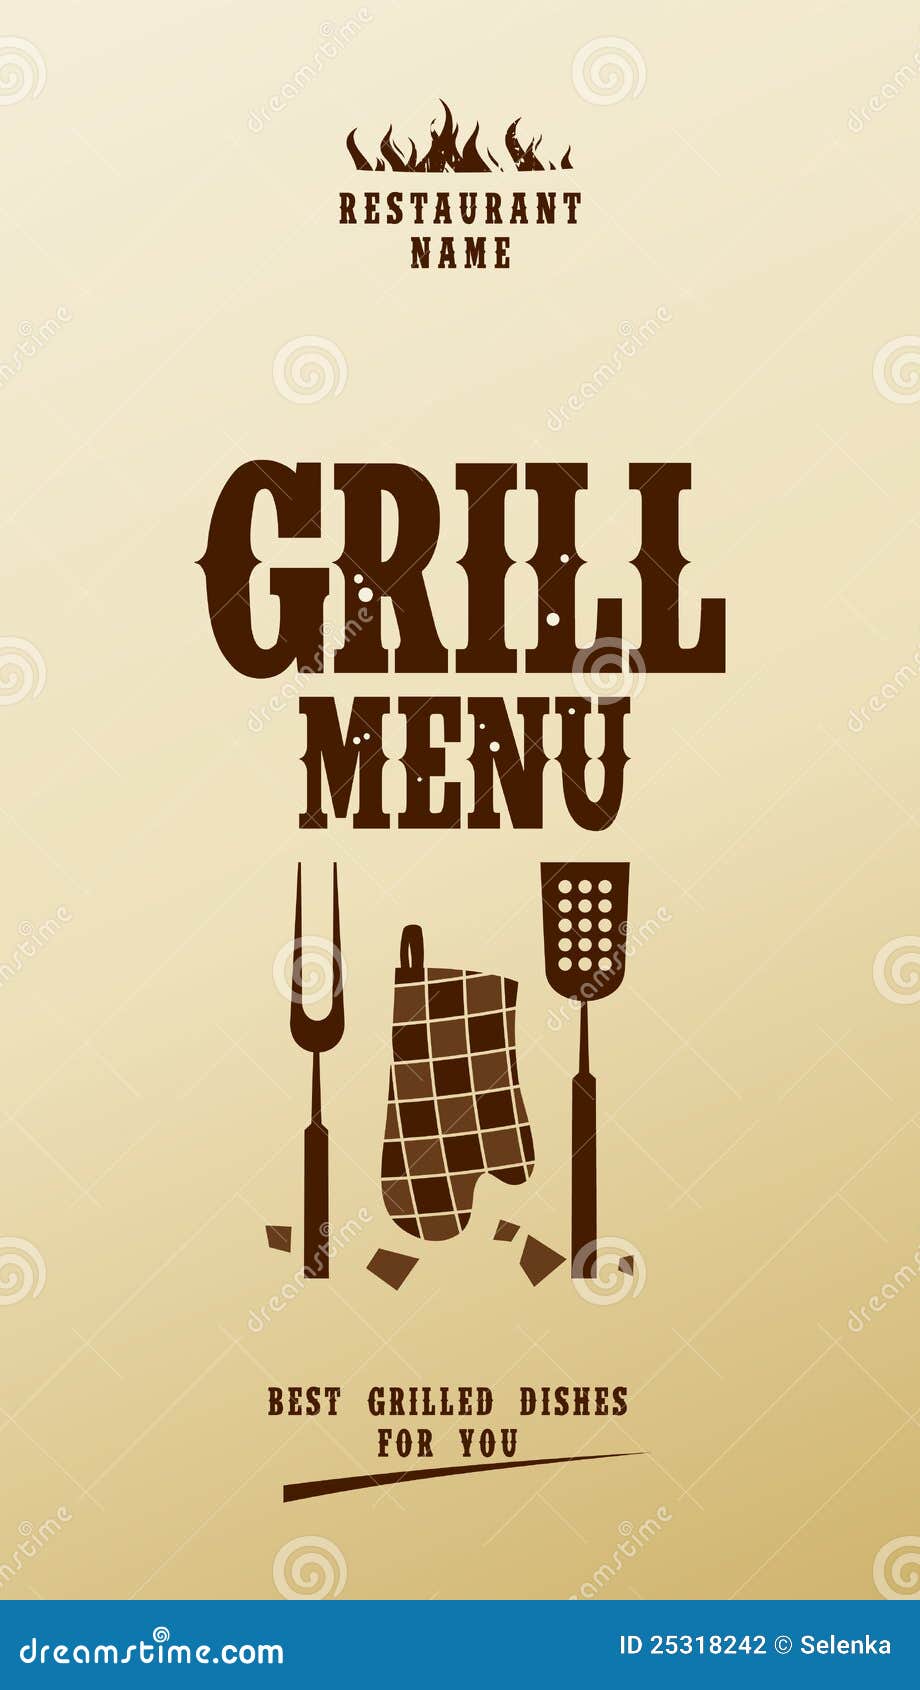 Grill Menu. Stock Photography - Image: 25318242